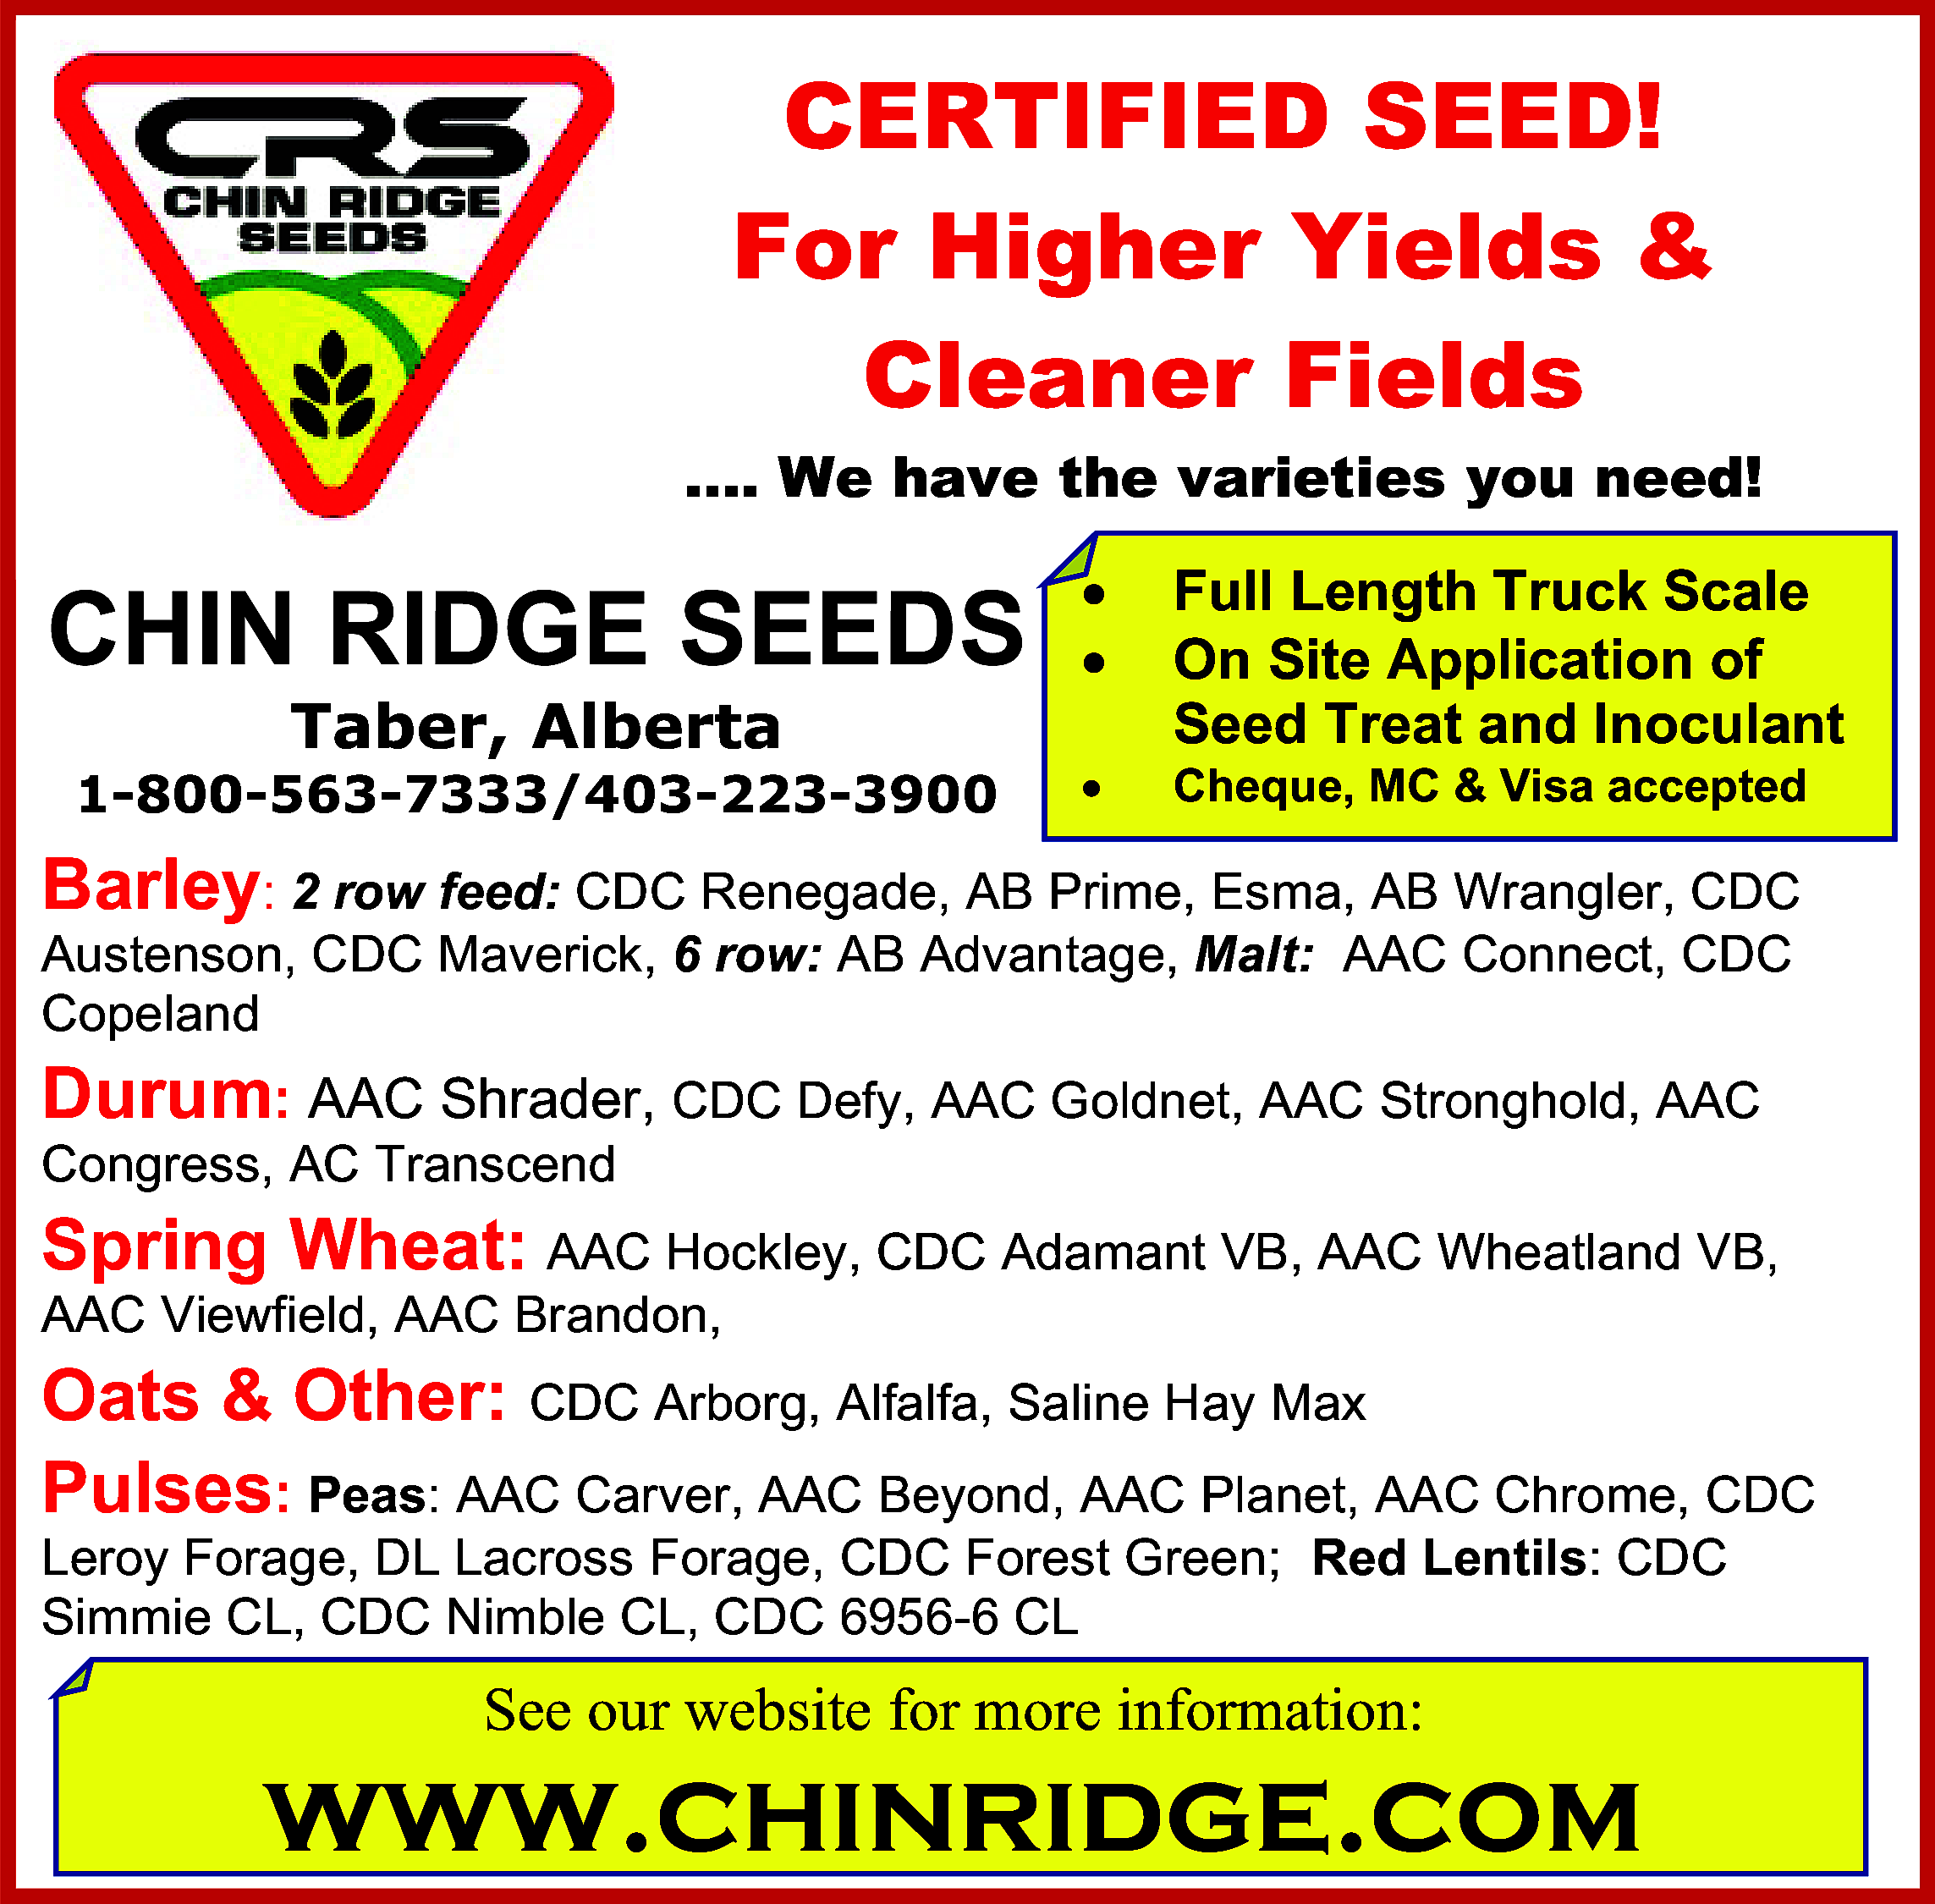 CERTIFIED SEED! <br>For Higher Yields  CERTIFIED SEED!  For Higher Yields &  Cleaner Fields  …. We have the varieties you need!    CHIN RIDGE SEEDS          1-800-563-7333/403-223-3900        Taber, Alberta    Full Length Truck Scale  On Site Application of  Seed Treat and Inoculant  Cheque, MC & Visa accepted    Barley: 2 row feed: CDC Renegade, AB Prime, Esma, AB Wrangler, CDC  Austenson, CDC Maverick, 6 row: AB Advantage, Malt: AAC Connect, CDC  Copeland  Durum: AAC Shrader, CDC Defy, AAC Goldnet, AAC Stronghold, AAC    Congress, AC Transcend    Spring Wheat: AAC Hockley, CDC Adamant VB, AAC Wheatland VB,  AAC Viewfield, AAC Brandon,    Oats & Other: CDC Arborg, Alfalfa, Saline Hay Max  Pulses: Peas: AAC Carver, AAC Beyond, AAC Planet, AAC Chrome, CDC    Leroy Forage, DL Lacross Forage, CDC Forest Green; Red Lentils: CDC  Simmie CL, CDC Nimble CL, CDC 6956-6 CL    See our website for more information:    www.chinridge.com    